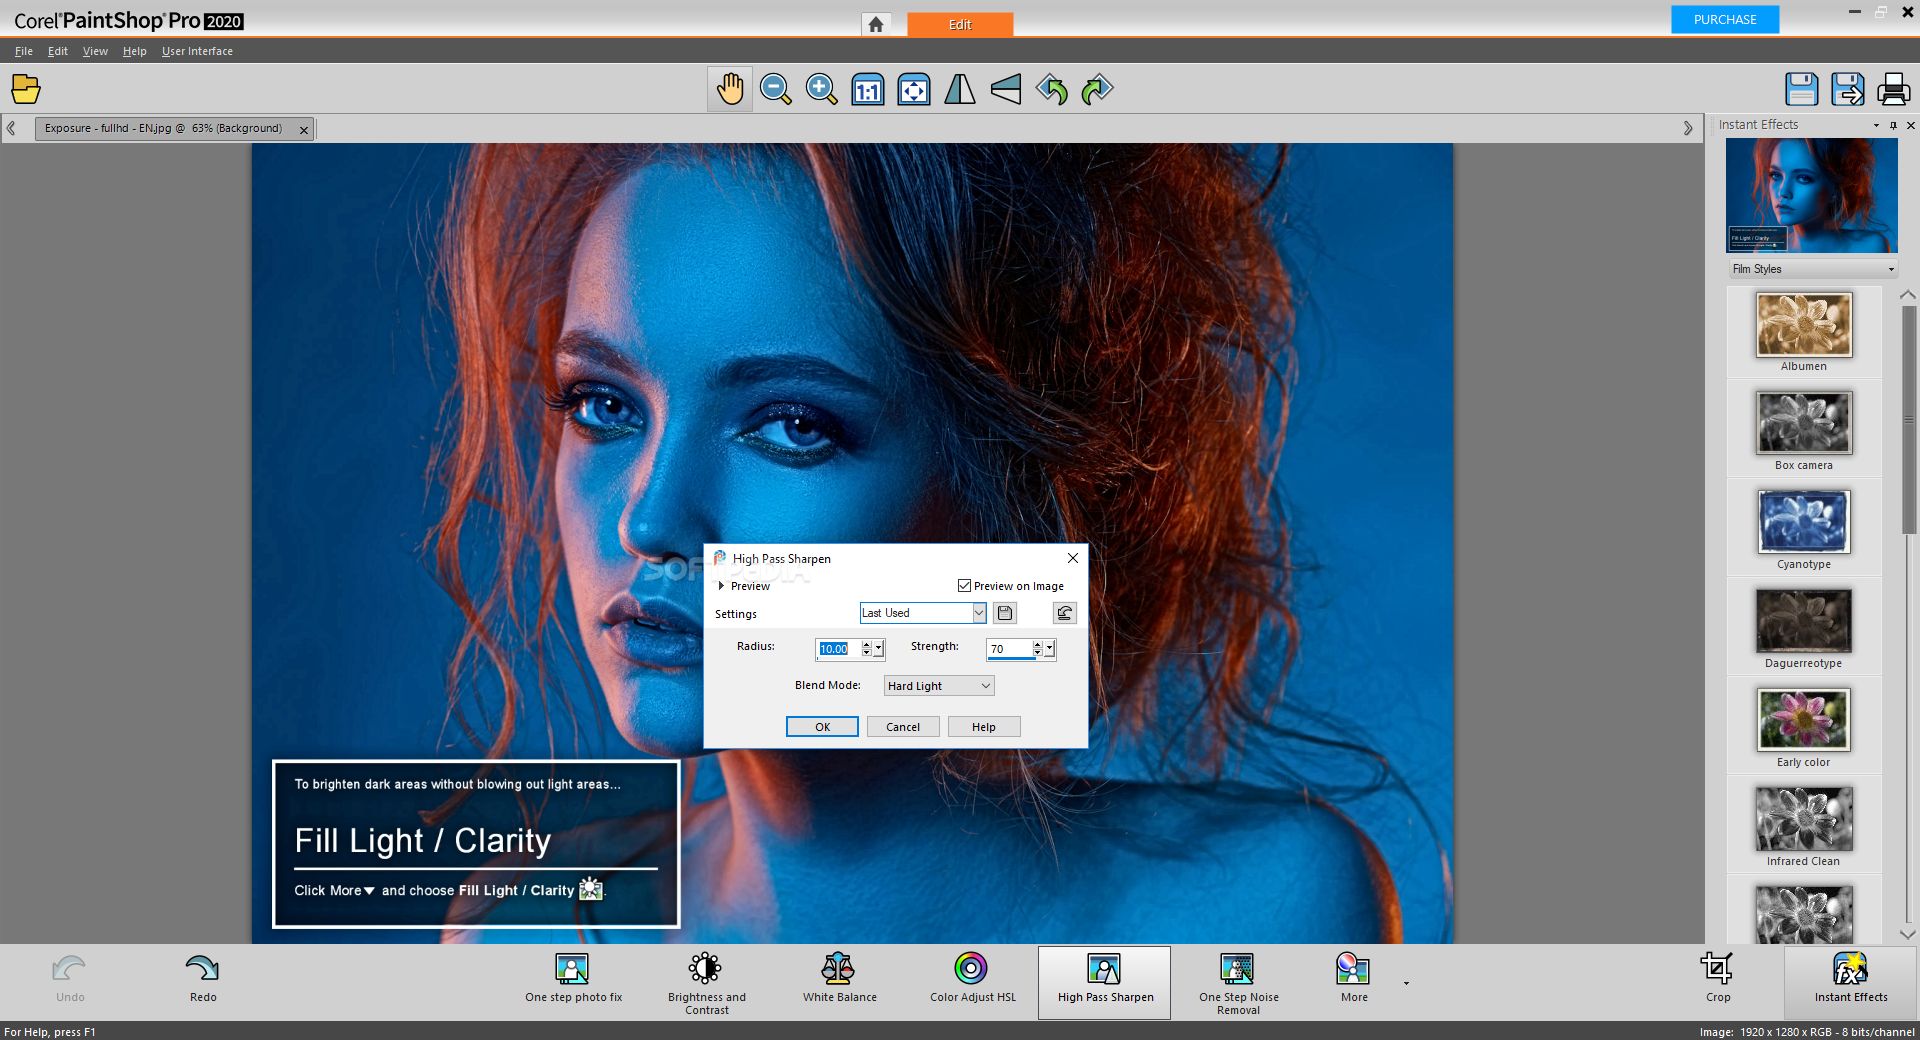 Corel Pro Download Packed with many options, this